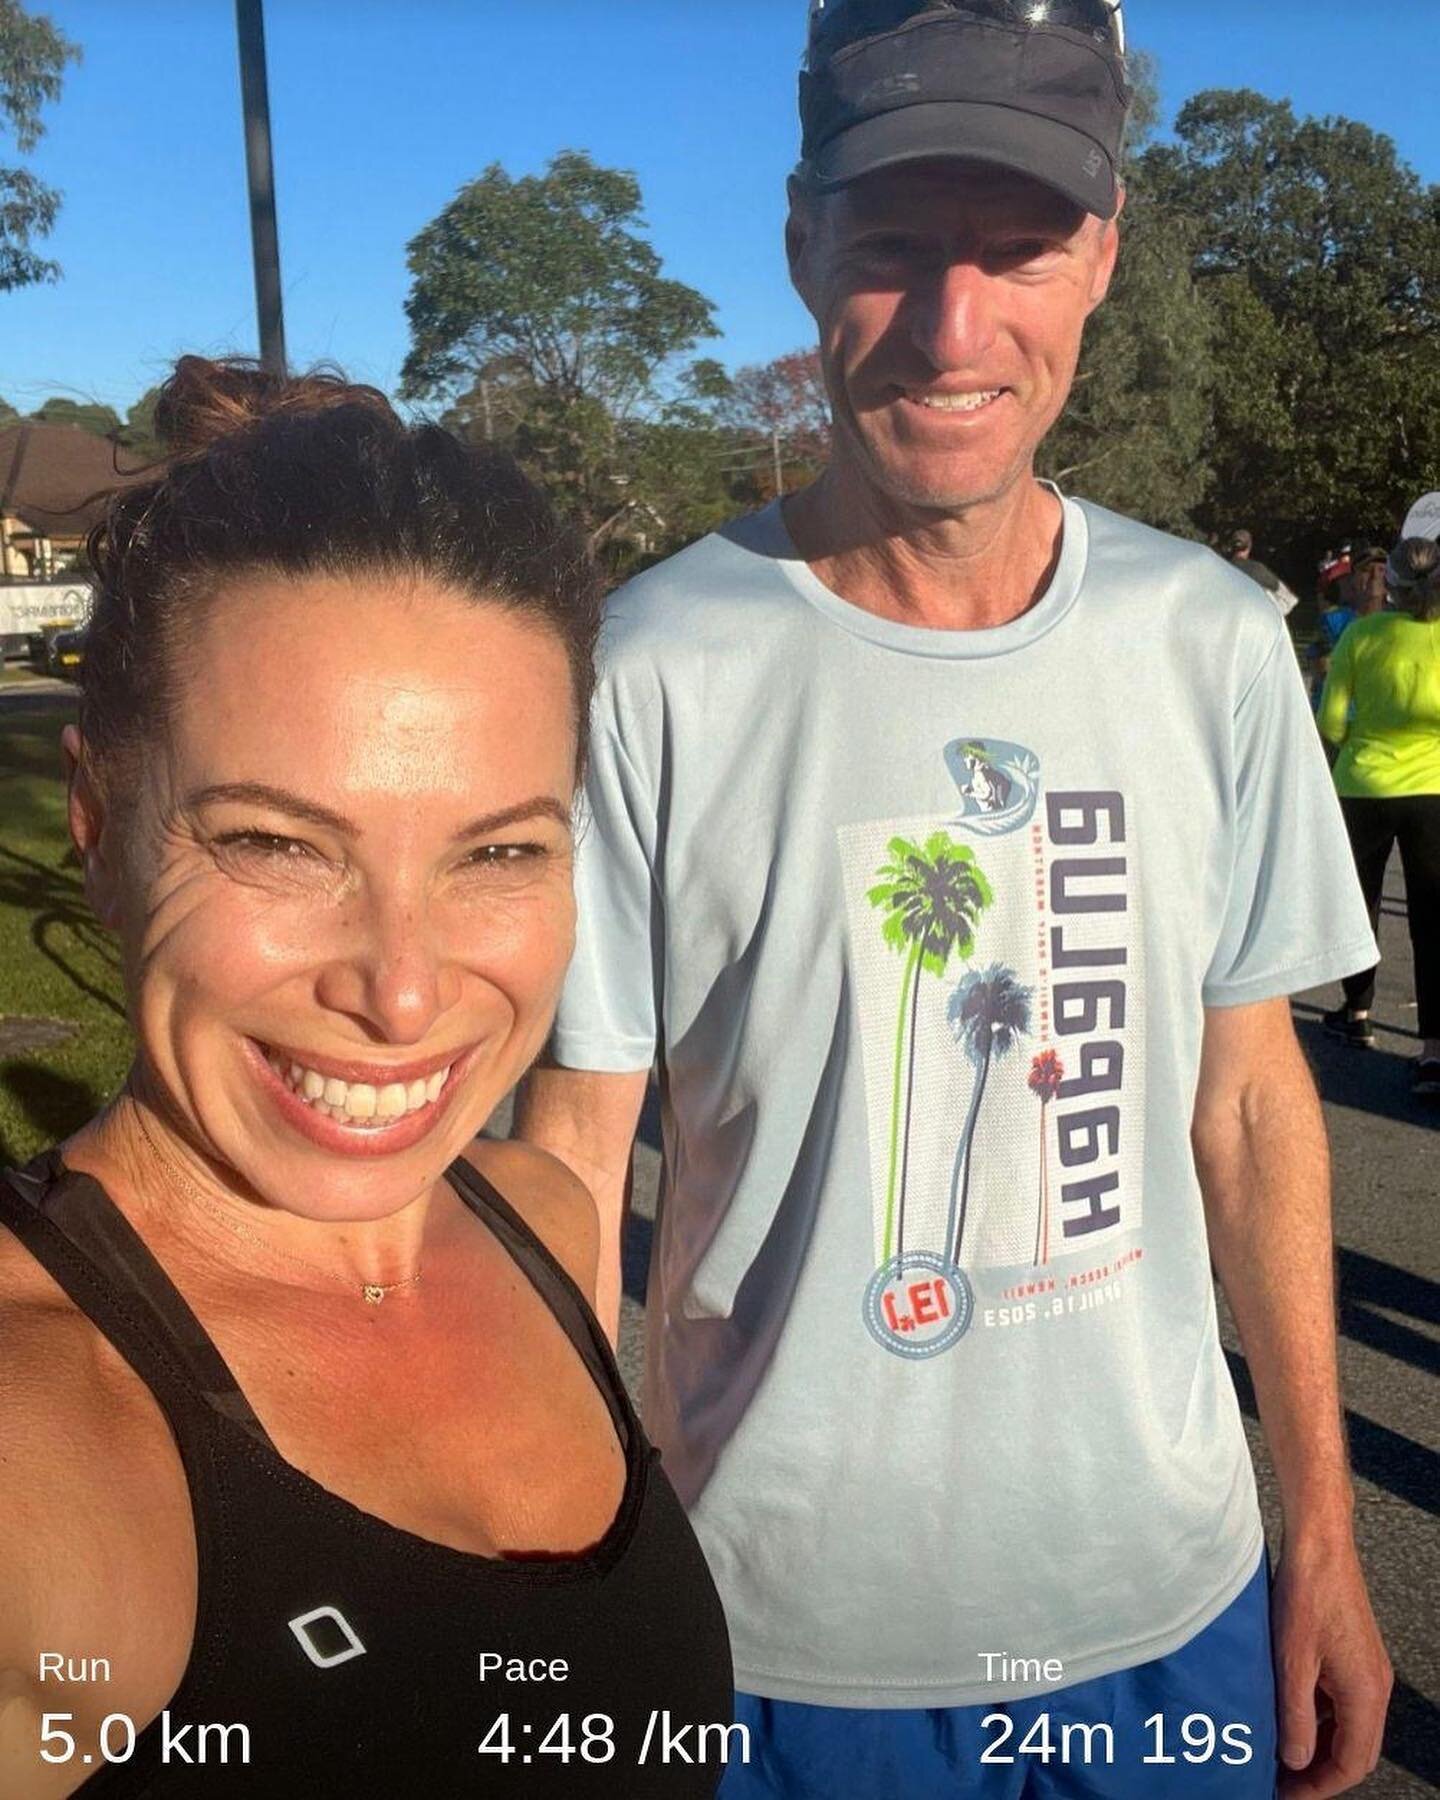 After a long break today I returned to @parkrunau 💗Paced to sub 25 by @gregstriders as a warm up for his half marathon tomorrow. Felt so good to be back!! Great to see @kelthemarathoner and @aaronspit as well.  See you next week! 

#swimbikerunfit#r